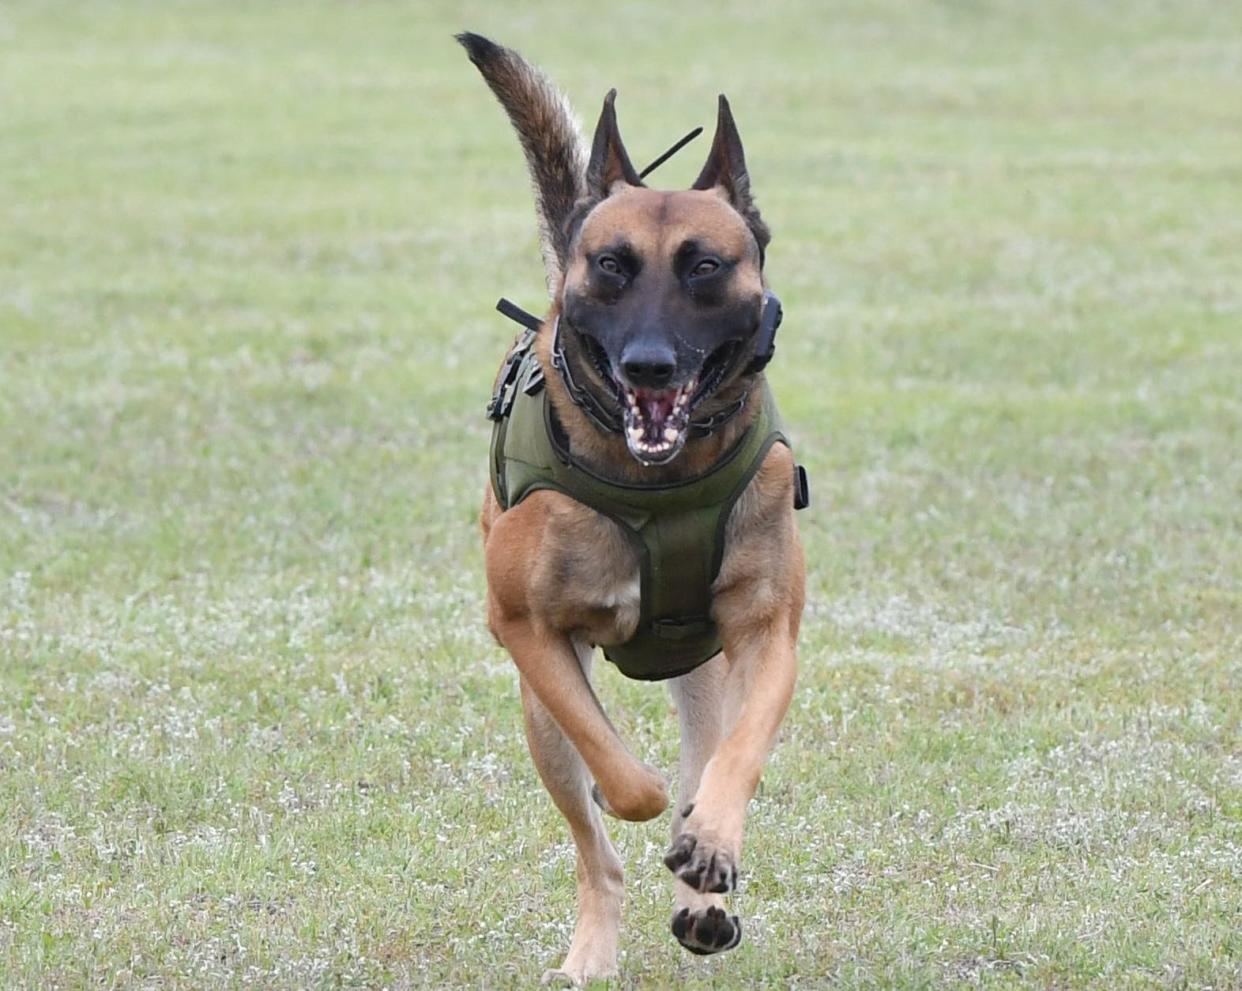 K9 officer Dino sprints during a demonstration at the Wichita County Law Enforcement Center in Wichita Falls on Wednesday. WCSO will host the National Detector Trials for dogs and handlers from across the country.